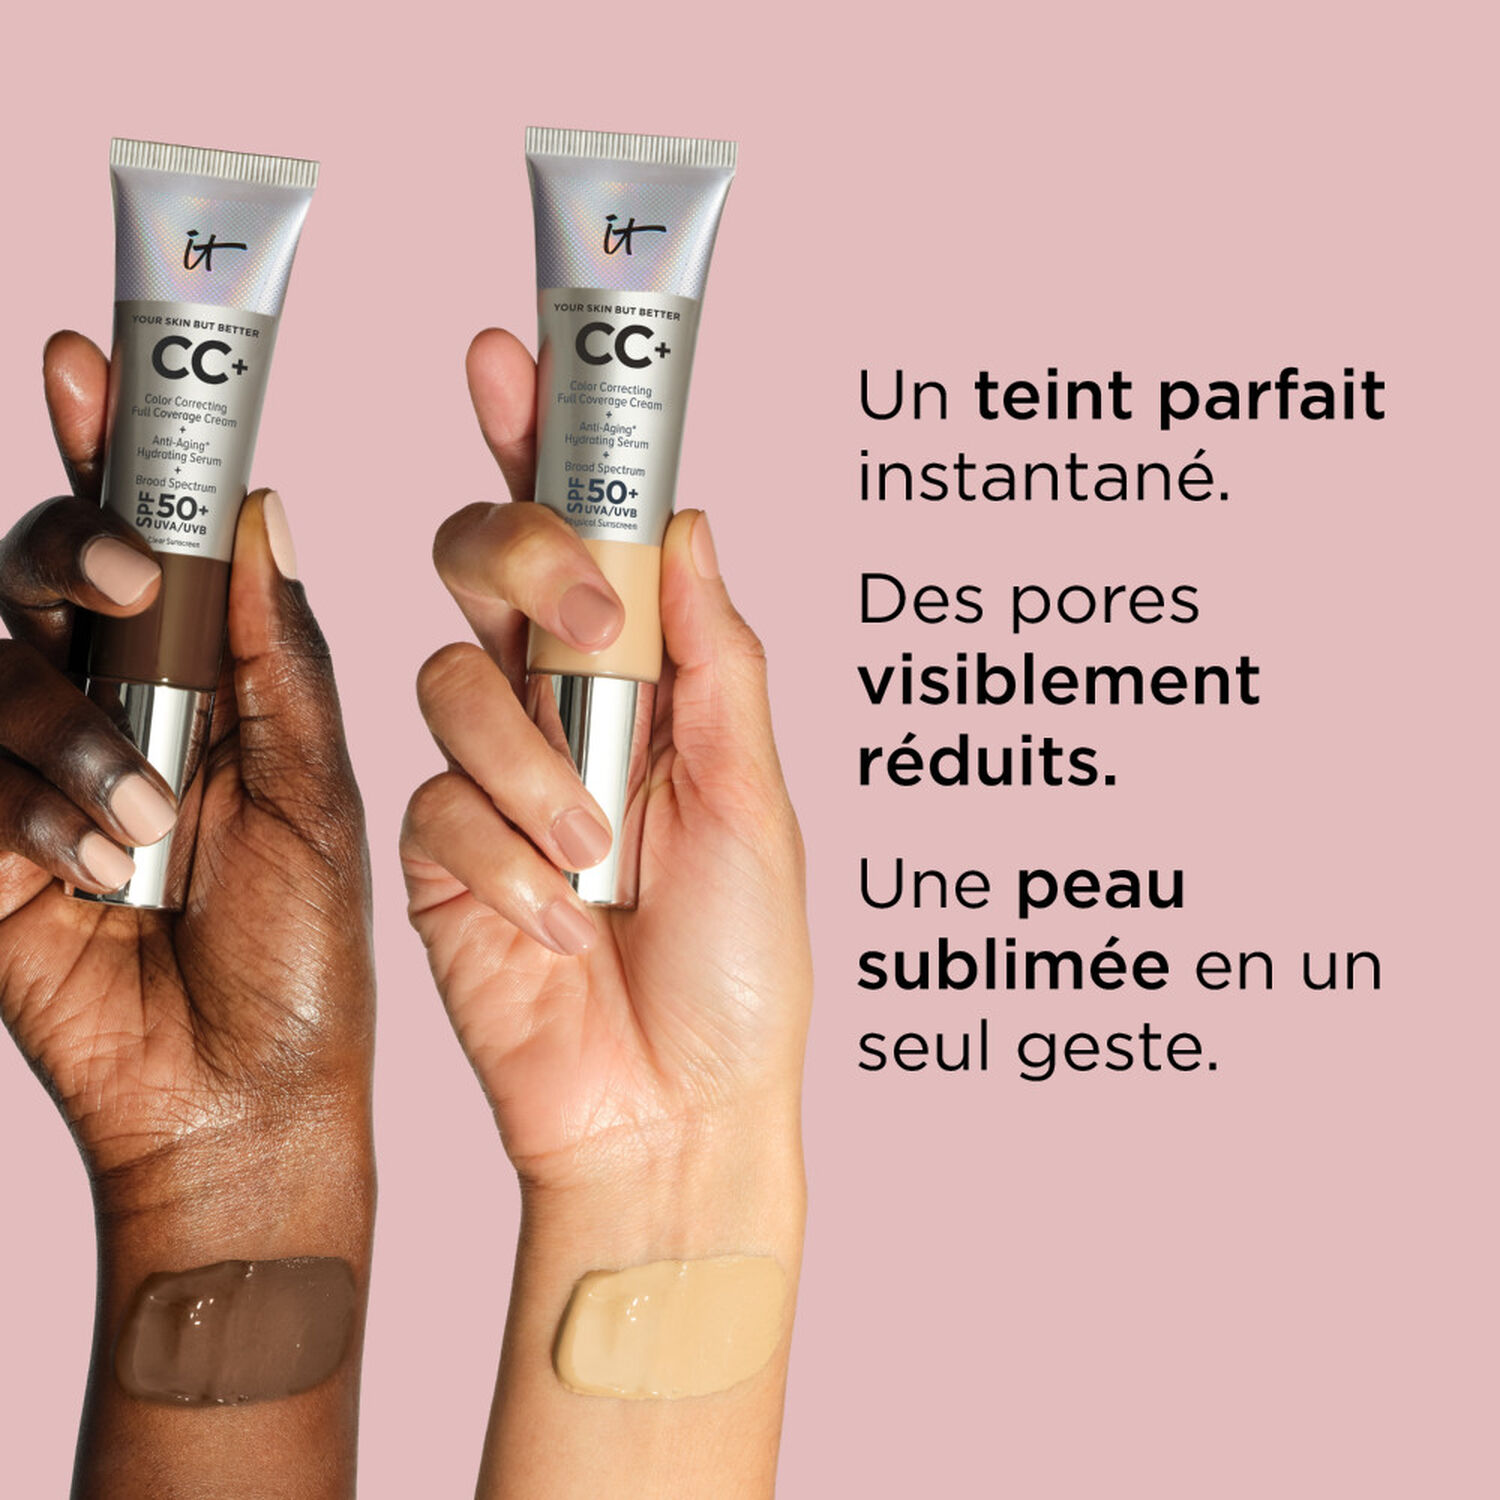 Your Skin But Better™ CC+™ Cream , it cosmetics